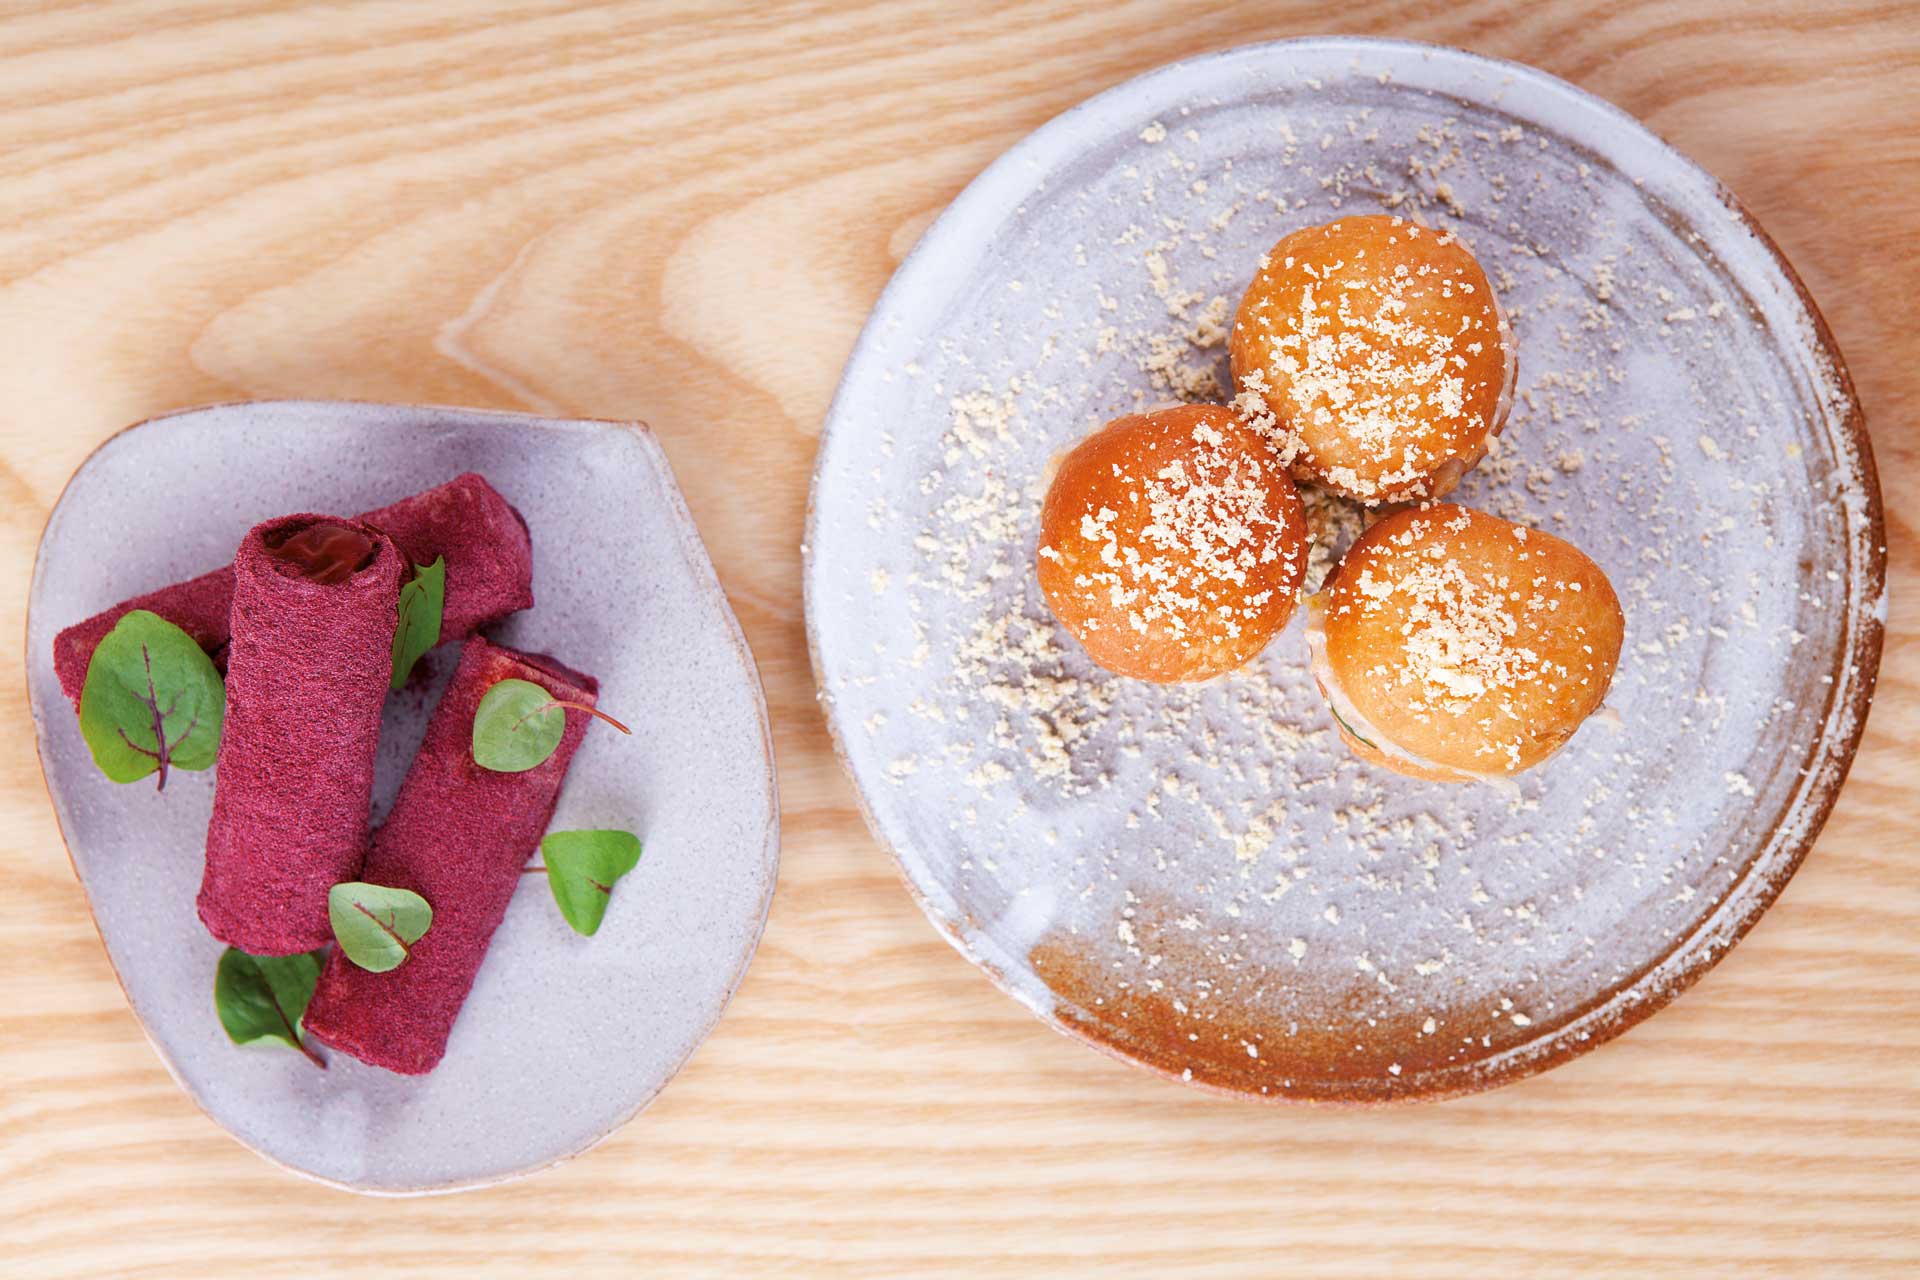 Crab doughnuts and beetroot rolls at Chiltern Firehouse